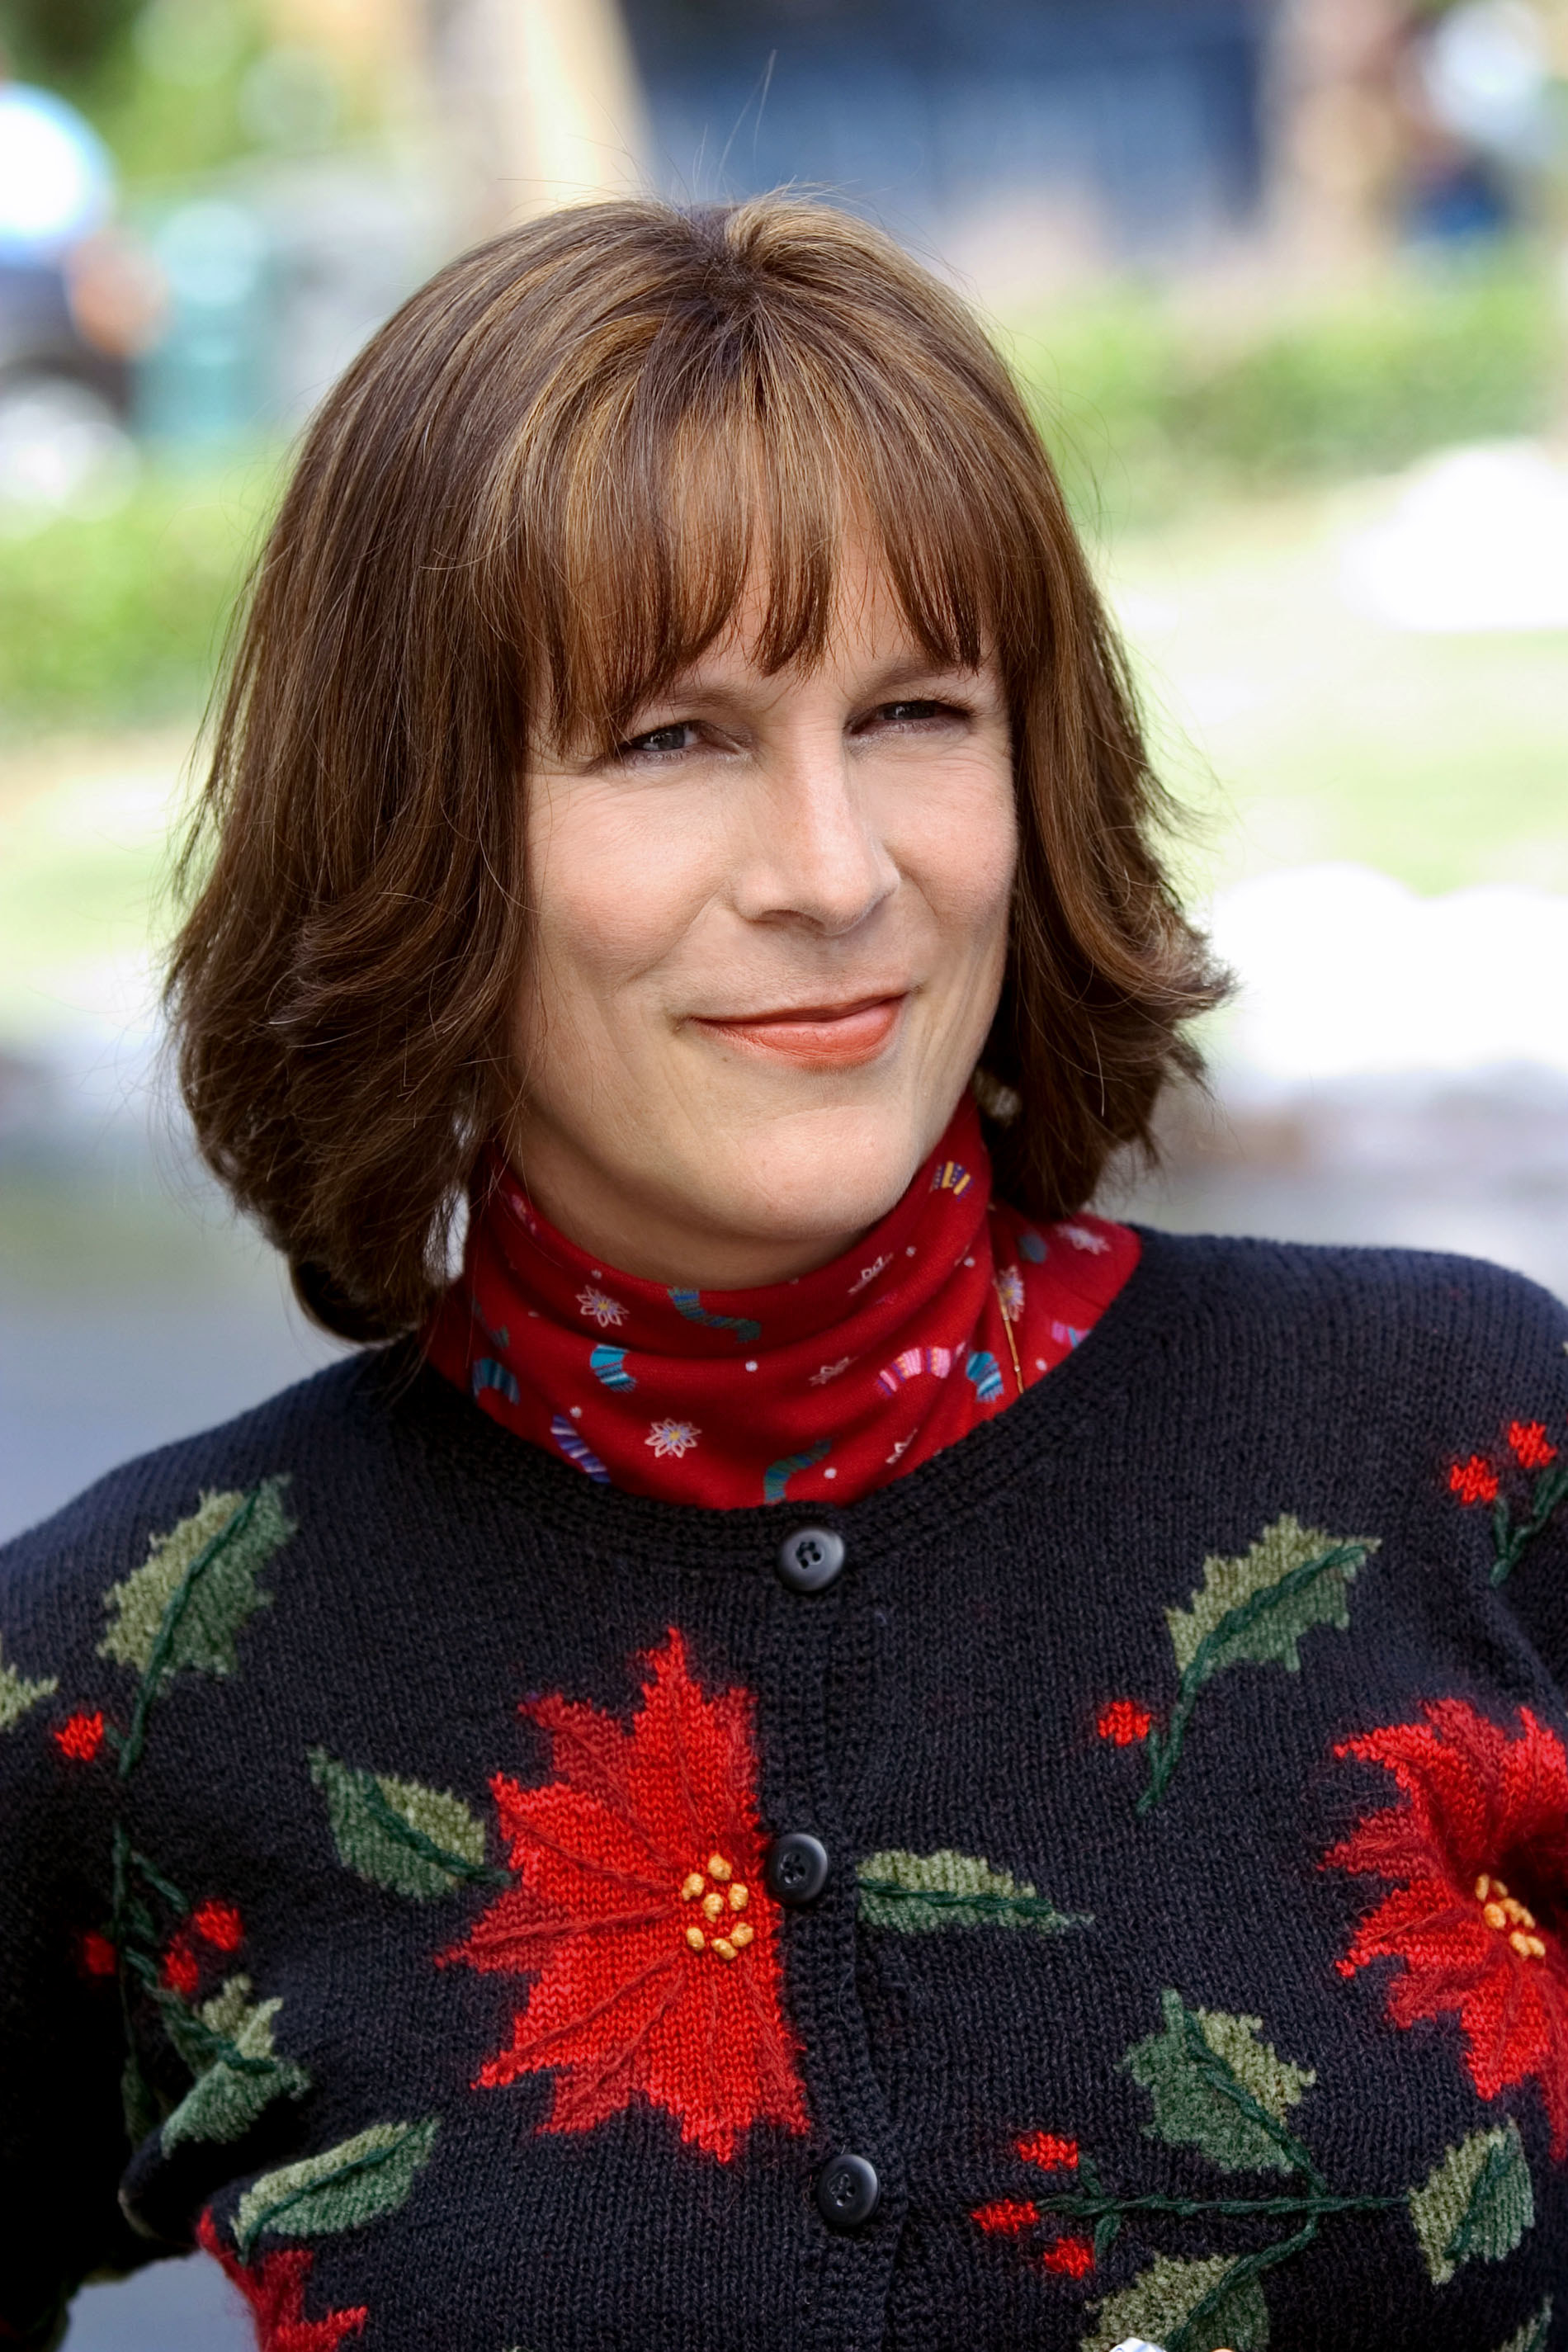 Curtis with long, brown hair and wearing a Christmas sweater